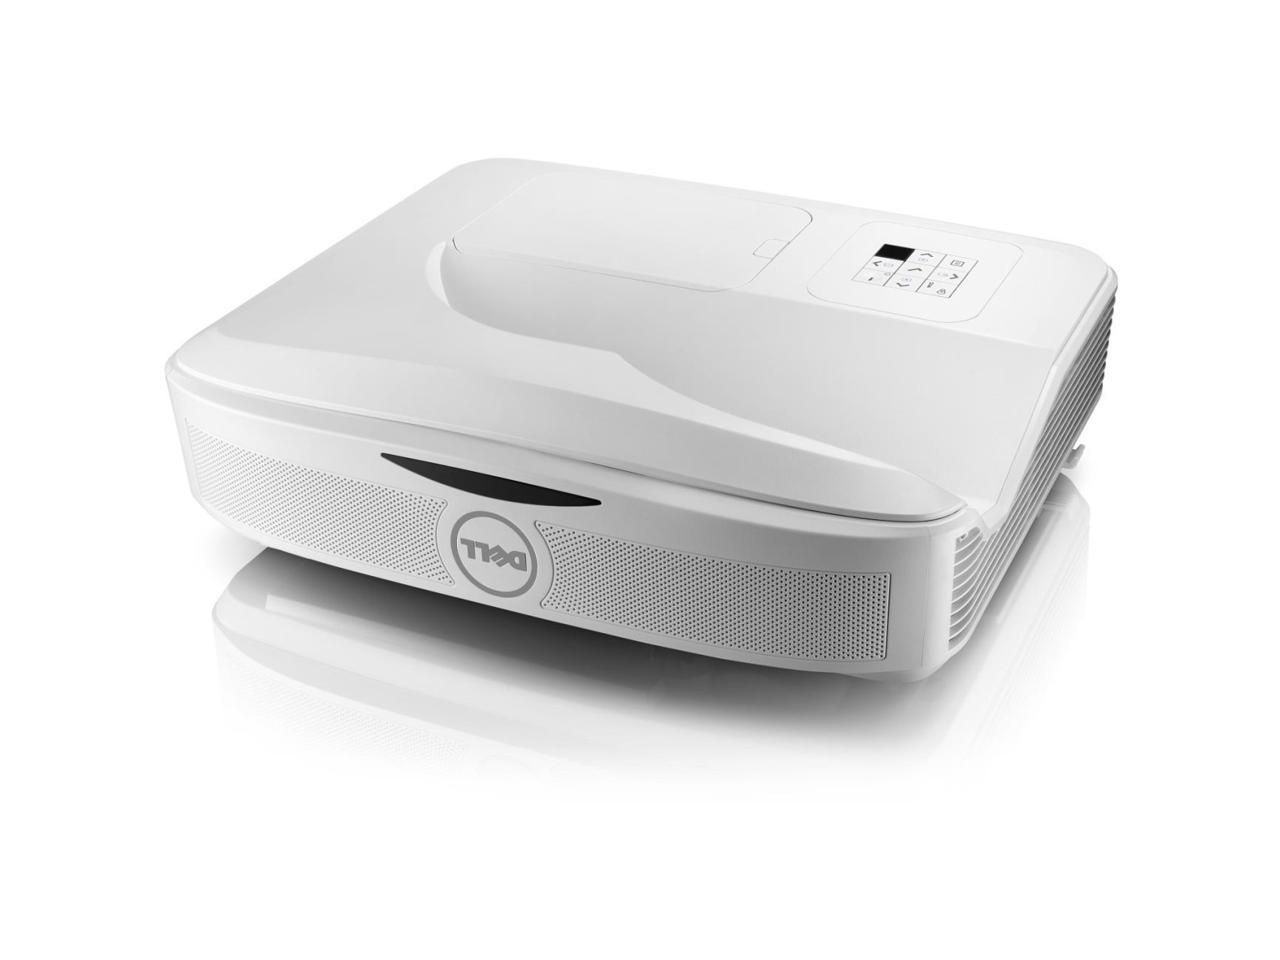 Dell - S560T - Dell S560T 3D Ready DLP Projector - 1080p - HDTV - 16:9 - Rear, Front - Interactive - 260 W - 3000 Hour